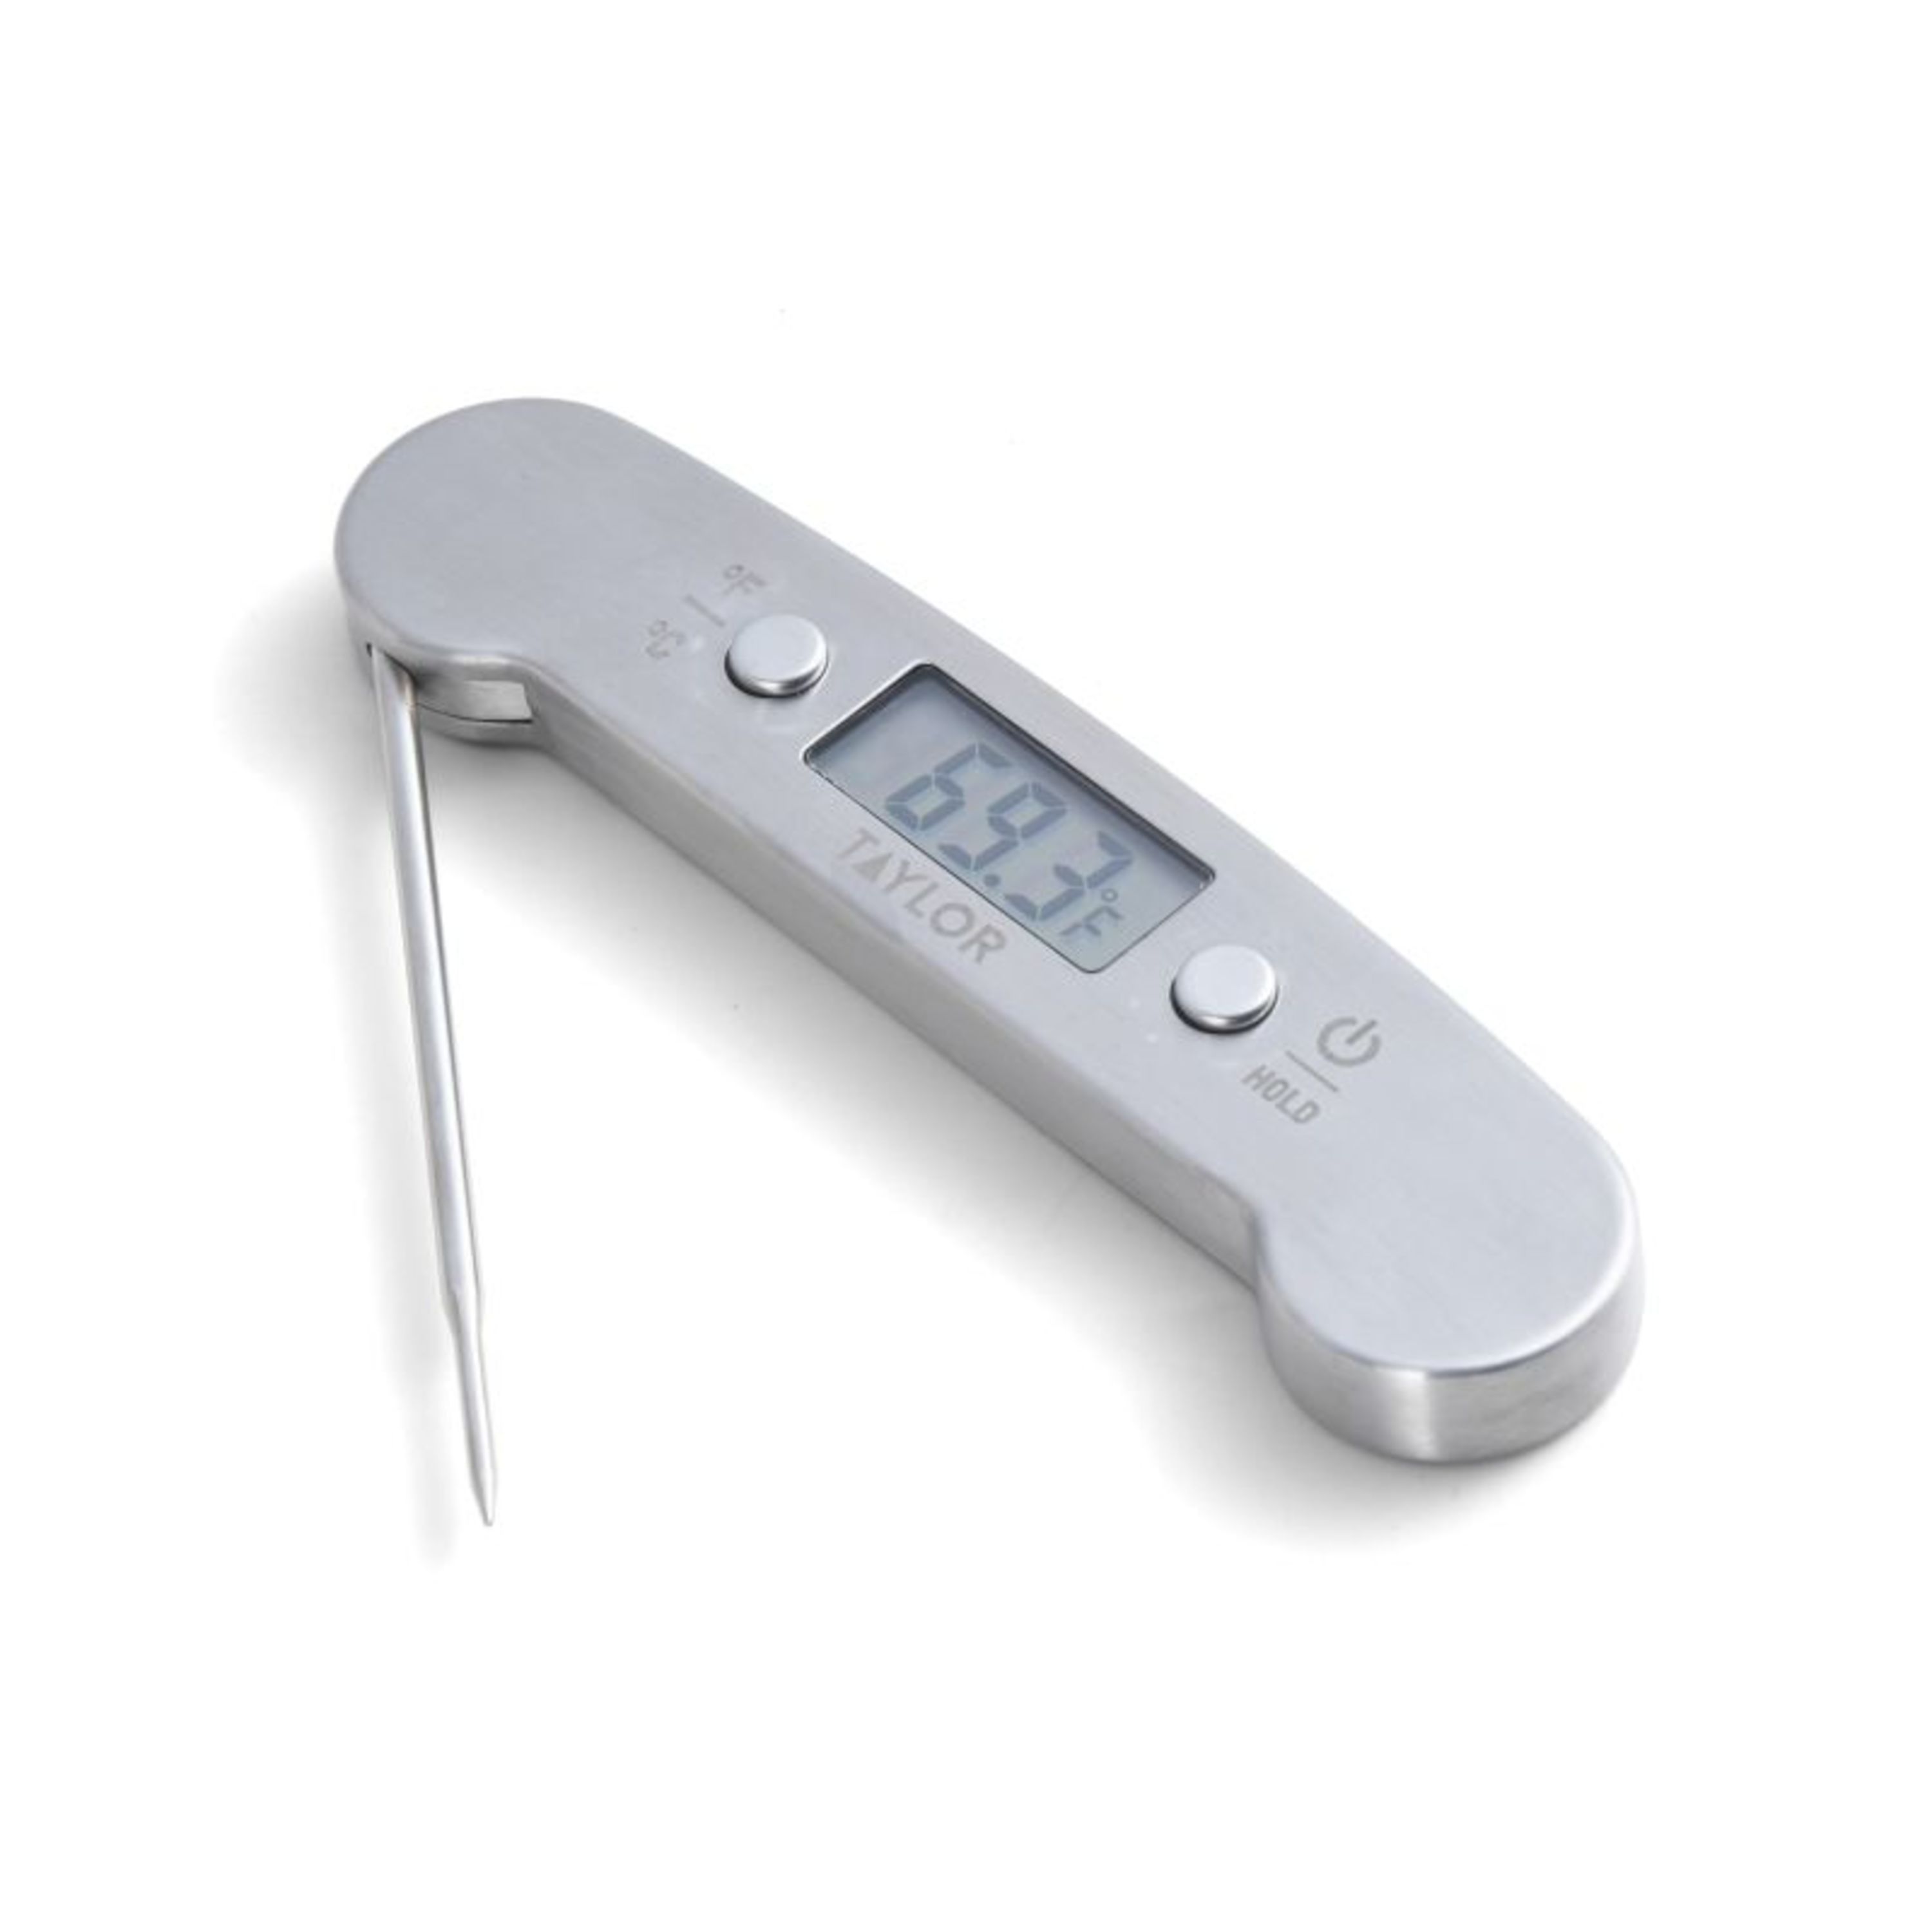 Talylor Pro Folding Pen Digital Thermometer Stainless Steel - image 2 of 9